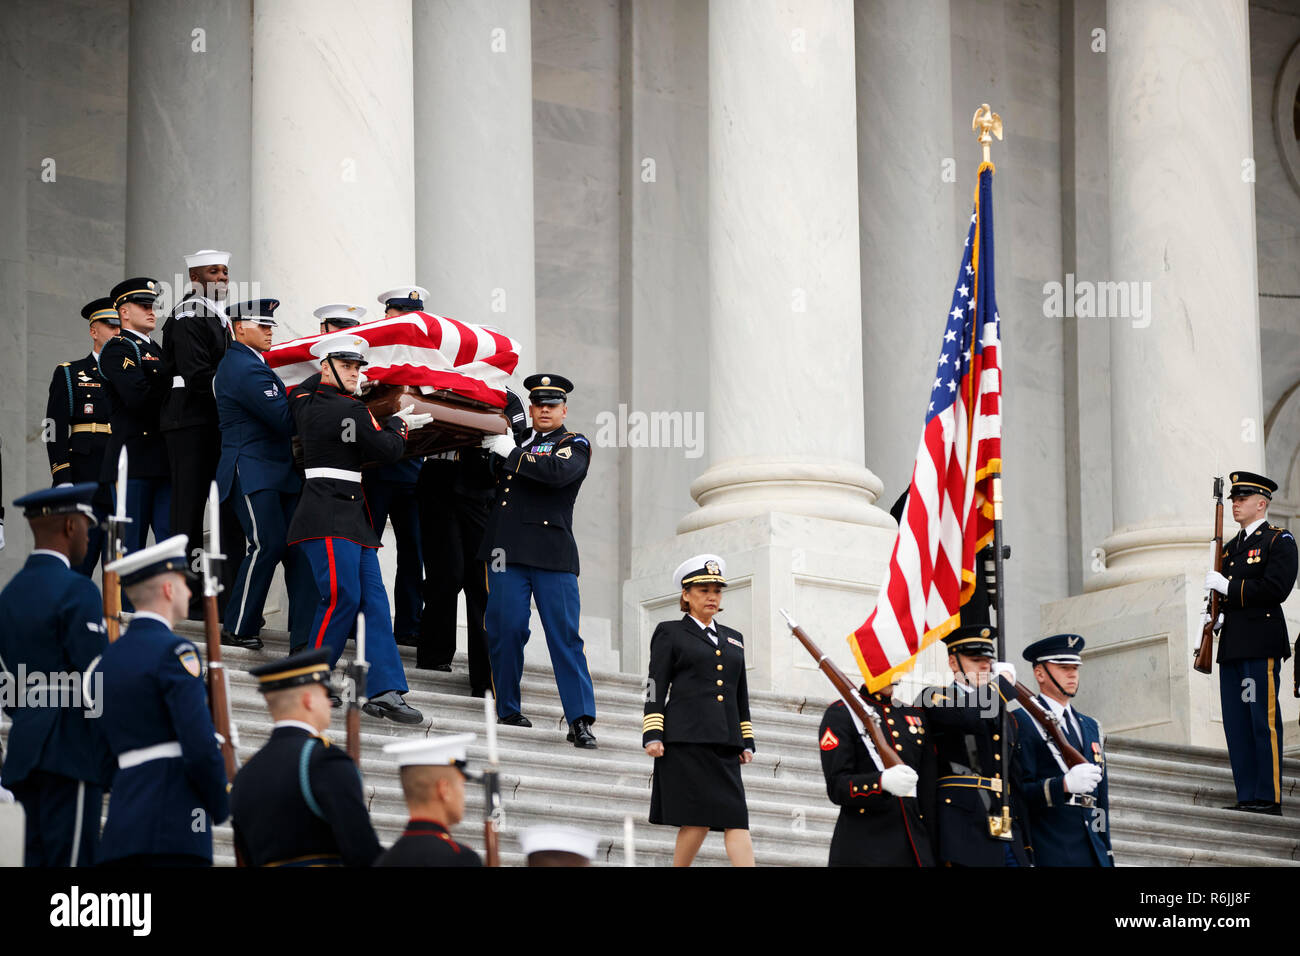 The flag-draped casket of former President George H.W. Bush is carried by a joint services military honor guard from the U.S. Capitol, Wednesday, Dec. 5, 2018, in Washington.  Credit: Shawn Thew / Pool via CNP | usage worldwide Stock Photo